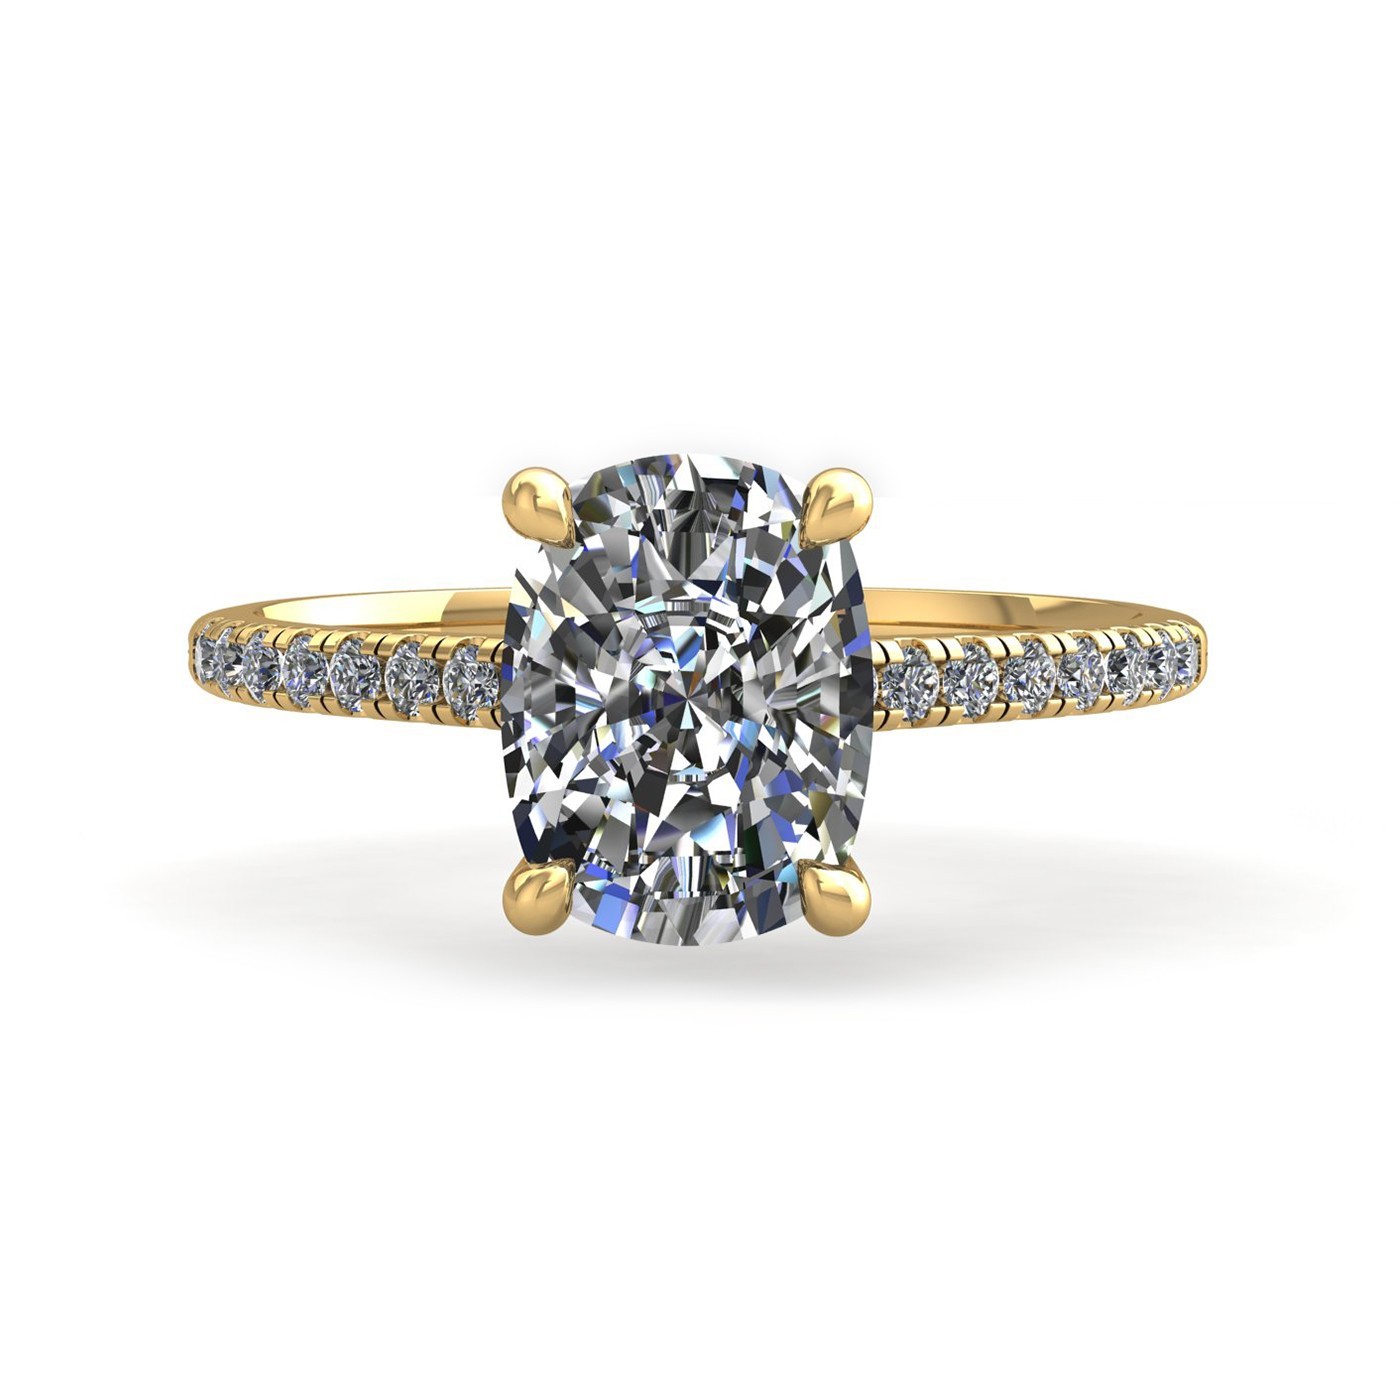 18k yellow gold  4 prongs elongated cushion cut diamond engagement ring with whisper thin pavÉ set band Photos & images